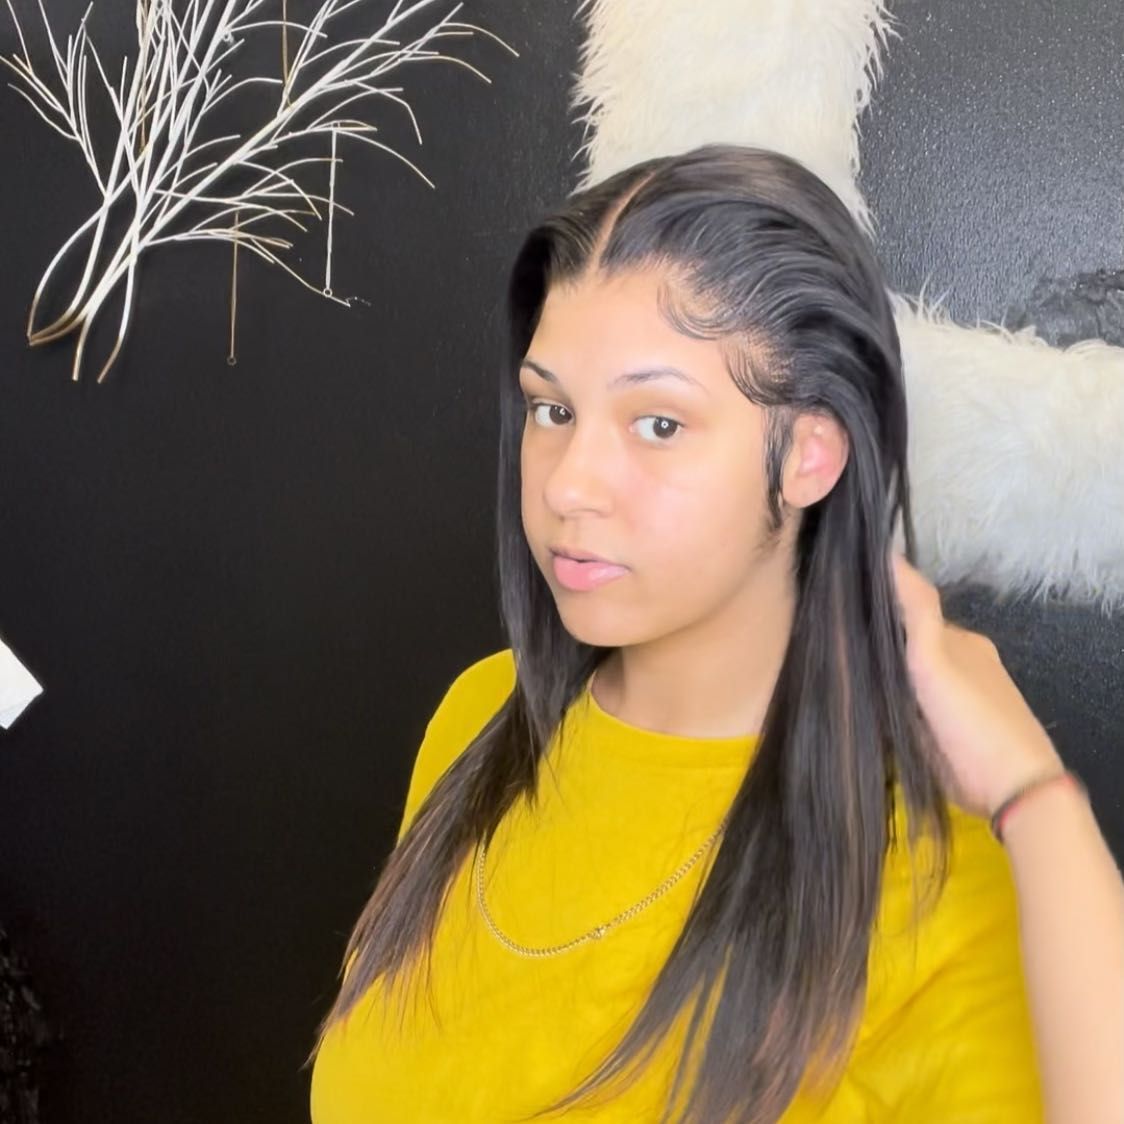 Frontal Weave Sew-In,With Natural Hair Shampoo portfolio